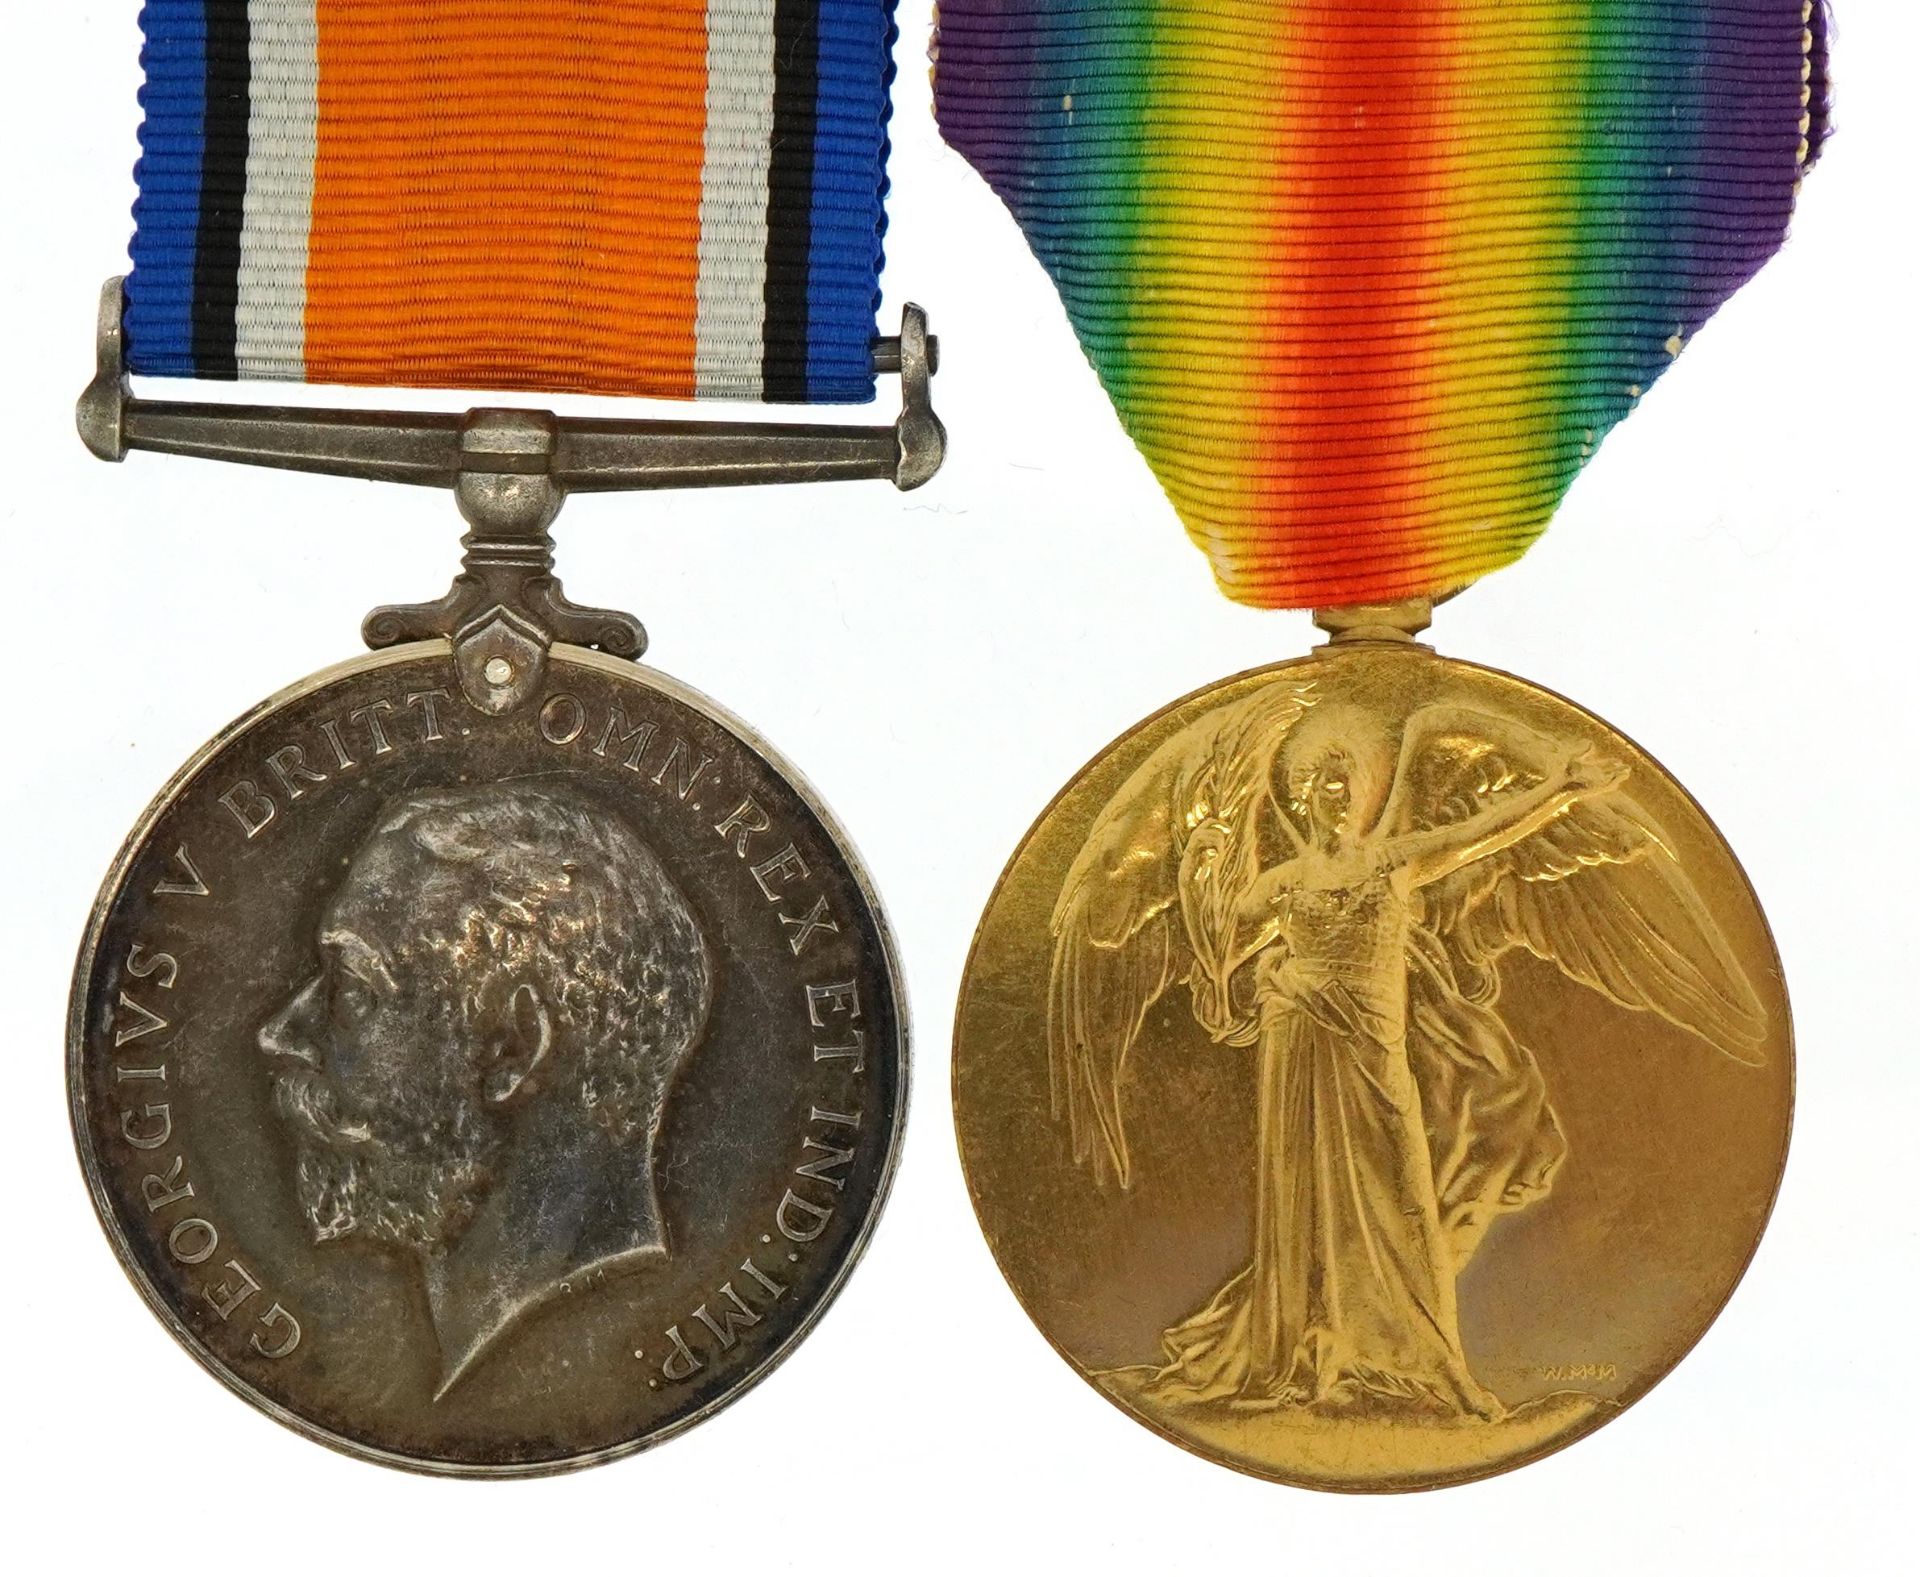 British military World War I pair awarded to 402196.2.A.M.S.M.DUTTON.R.A.F.